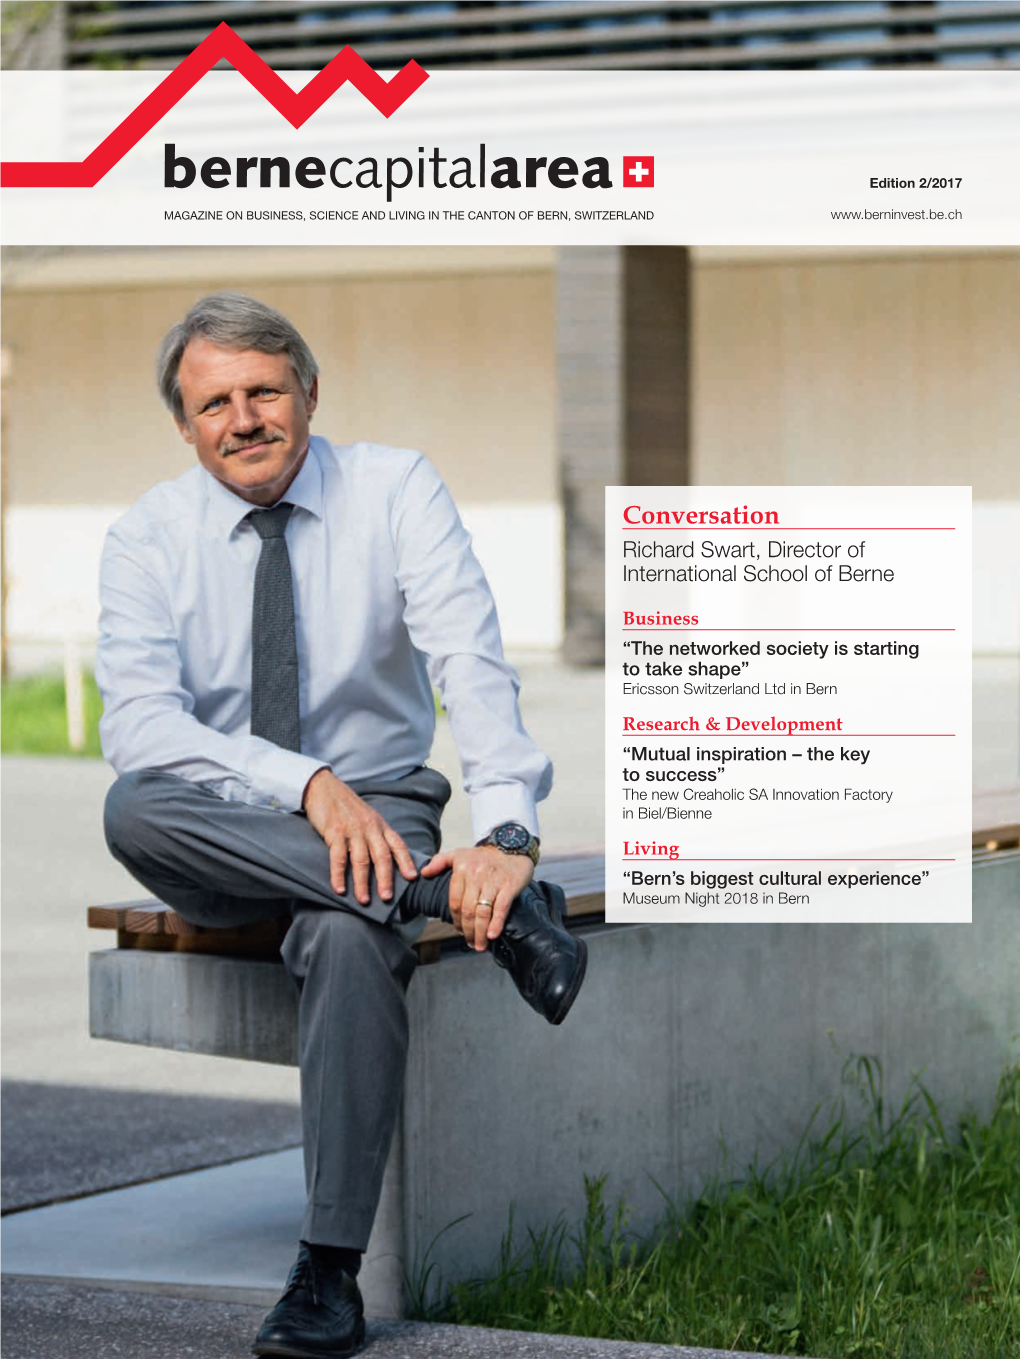 Magazine on Business, Science and Living in the Canton of Bern